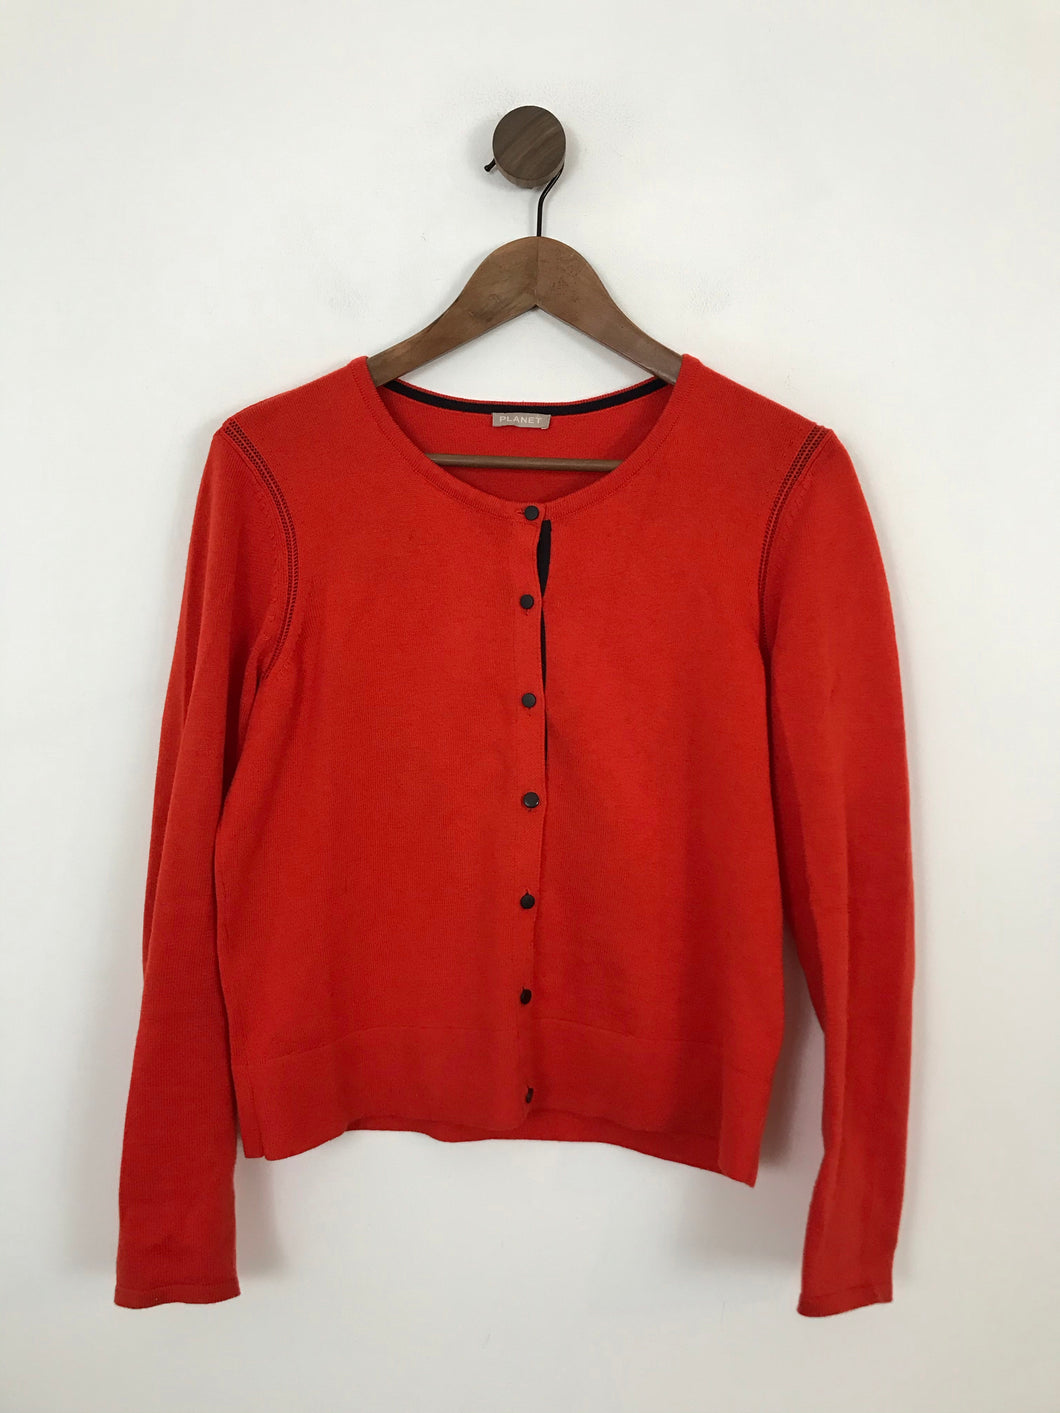 Planet Women's Button Up Cardigan | S UK8 | Red